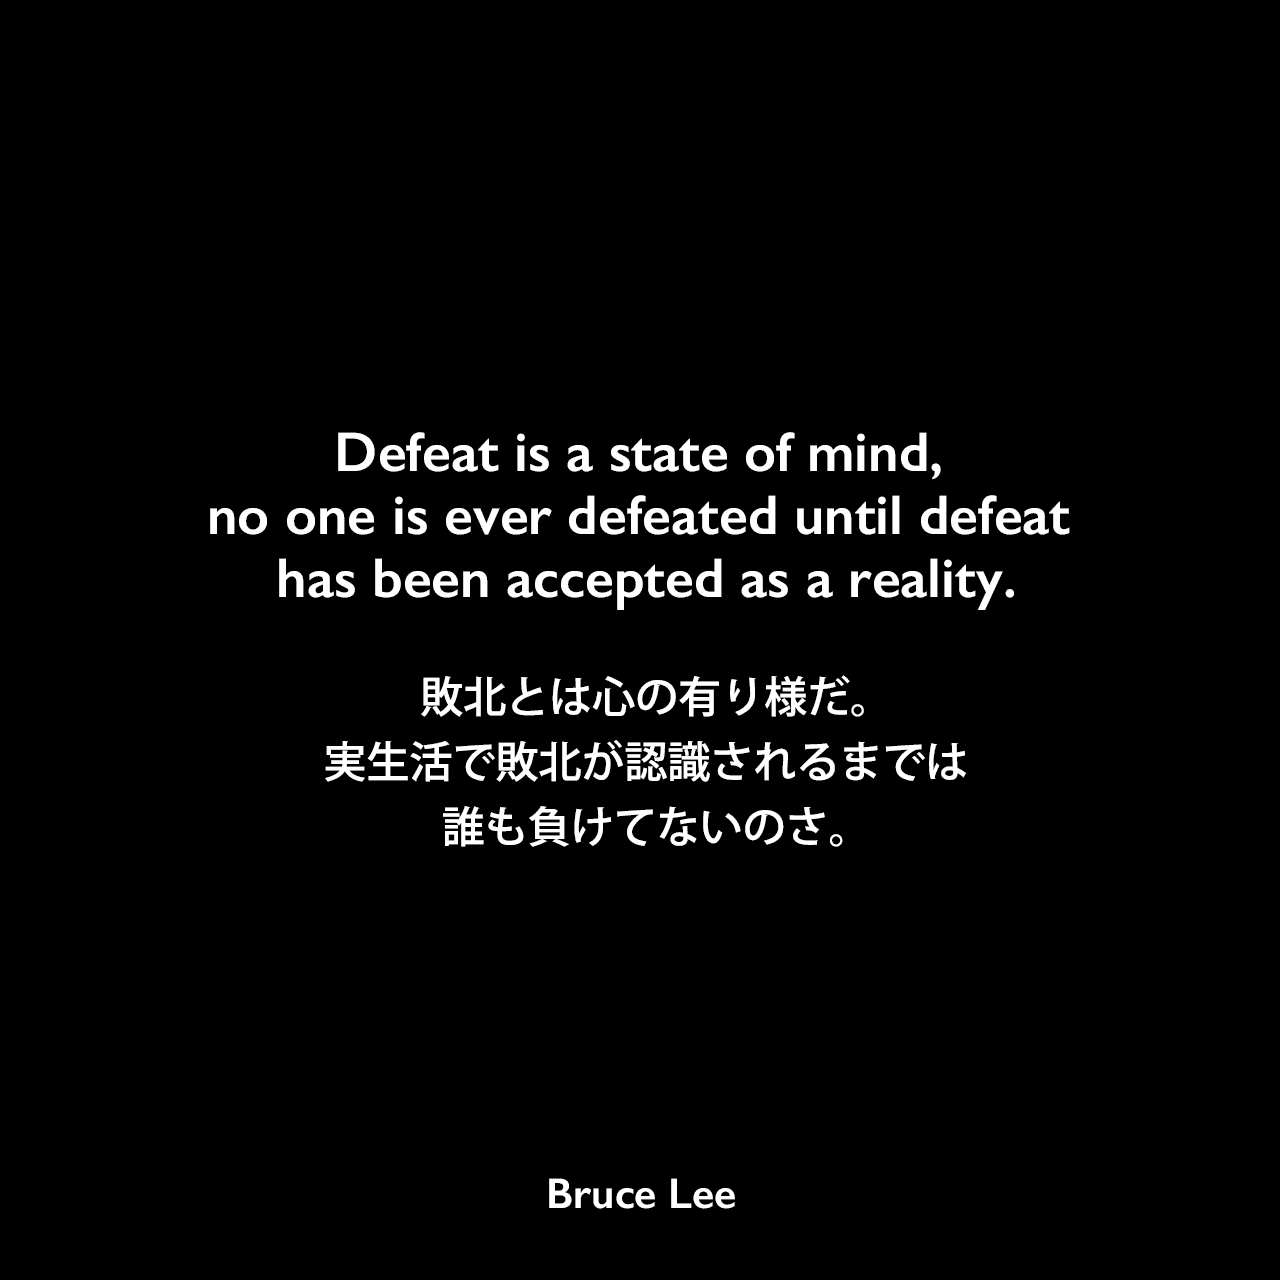 Defeat is a state of mind, no one is ever defeated until defeat has been accepted as a reality.敗北とは心の有り様だ。実生活で敗北が認識されるまでは、誰も負けてないのさ。Bruce Lee